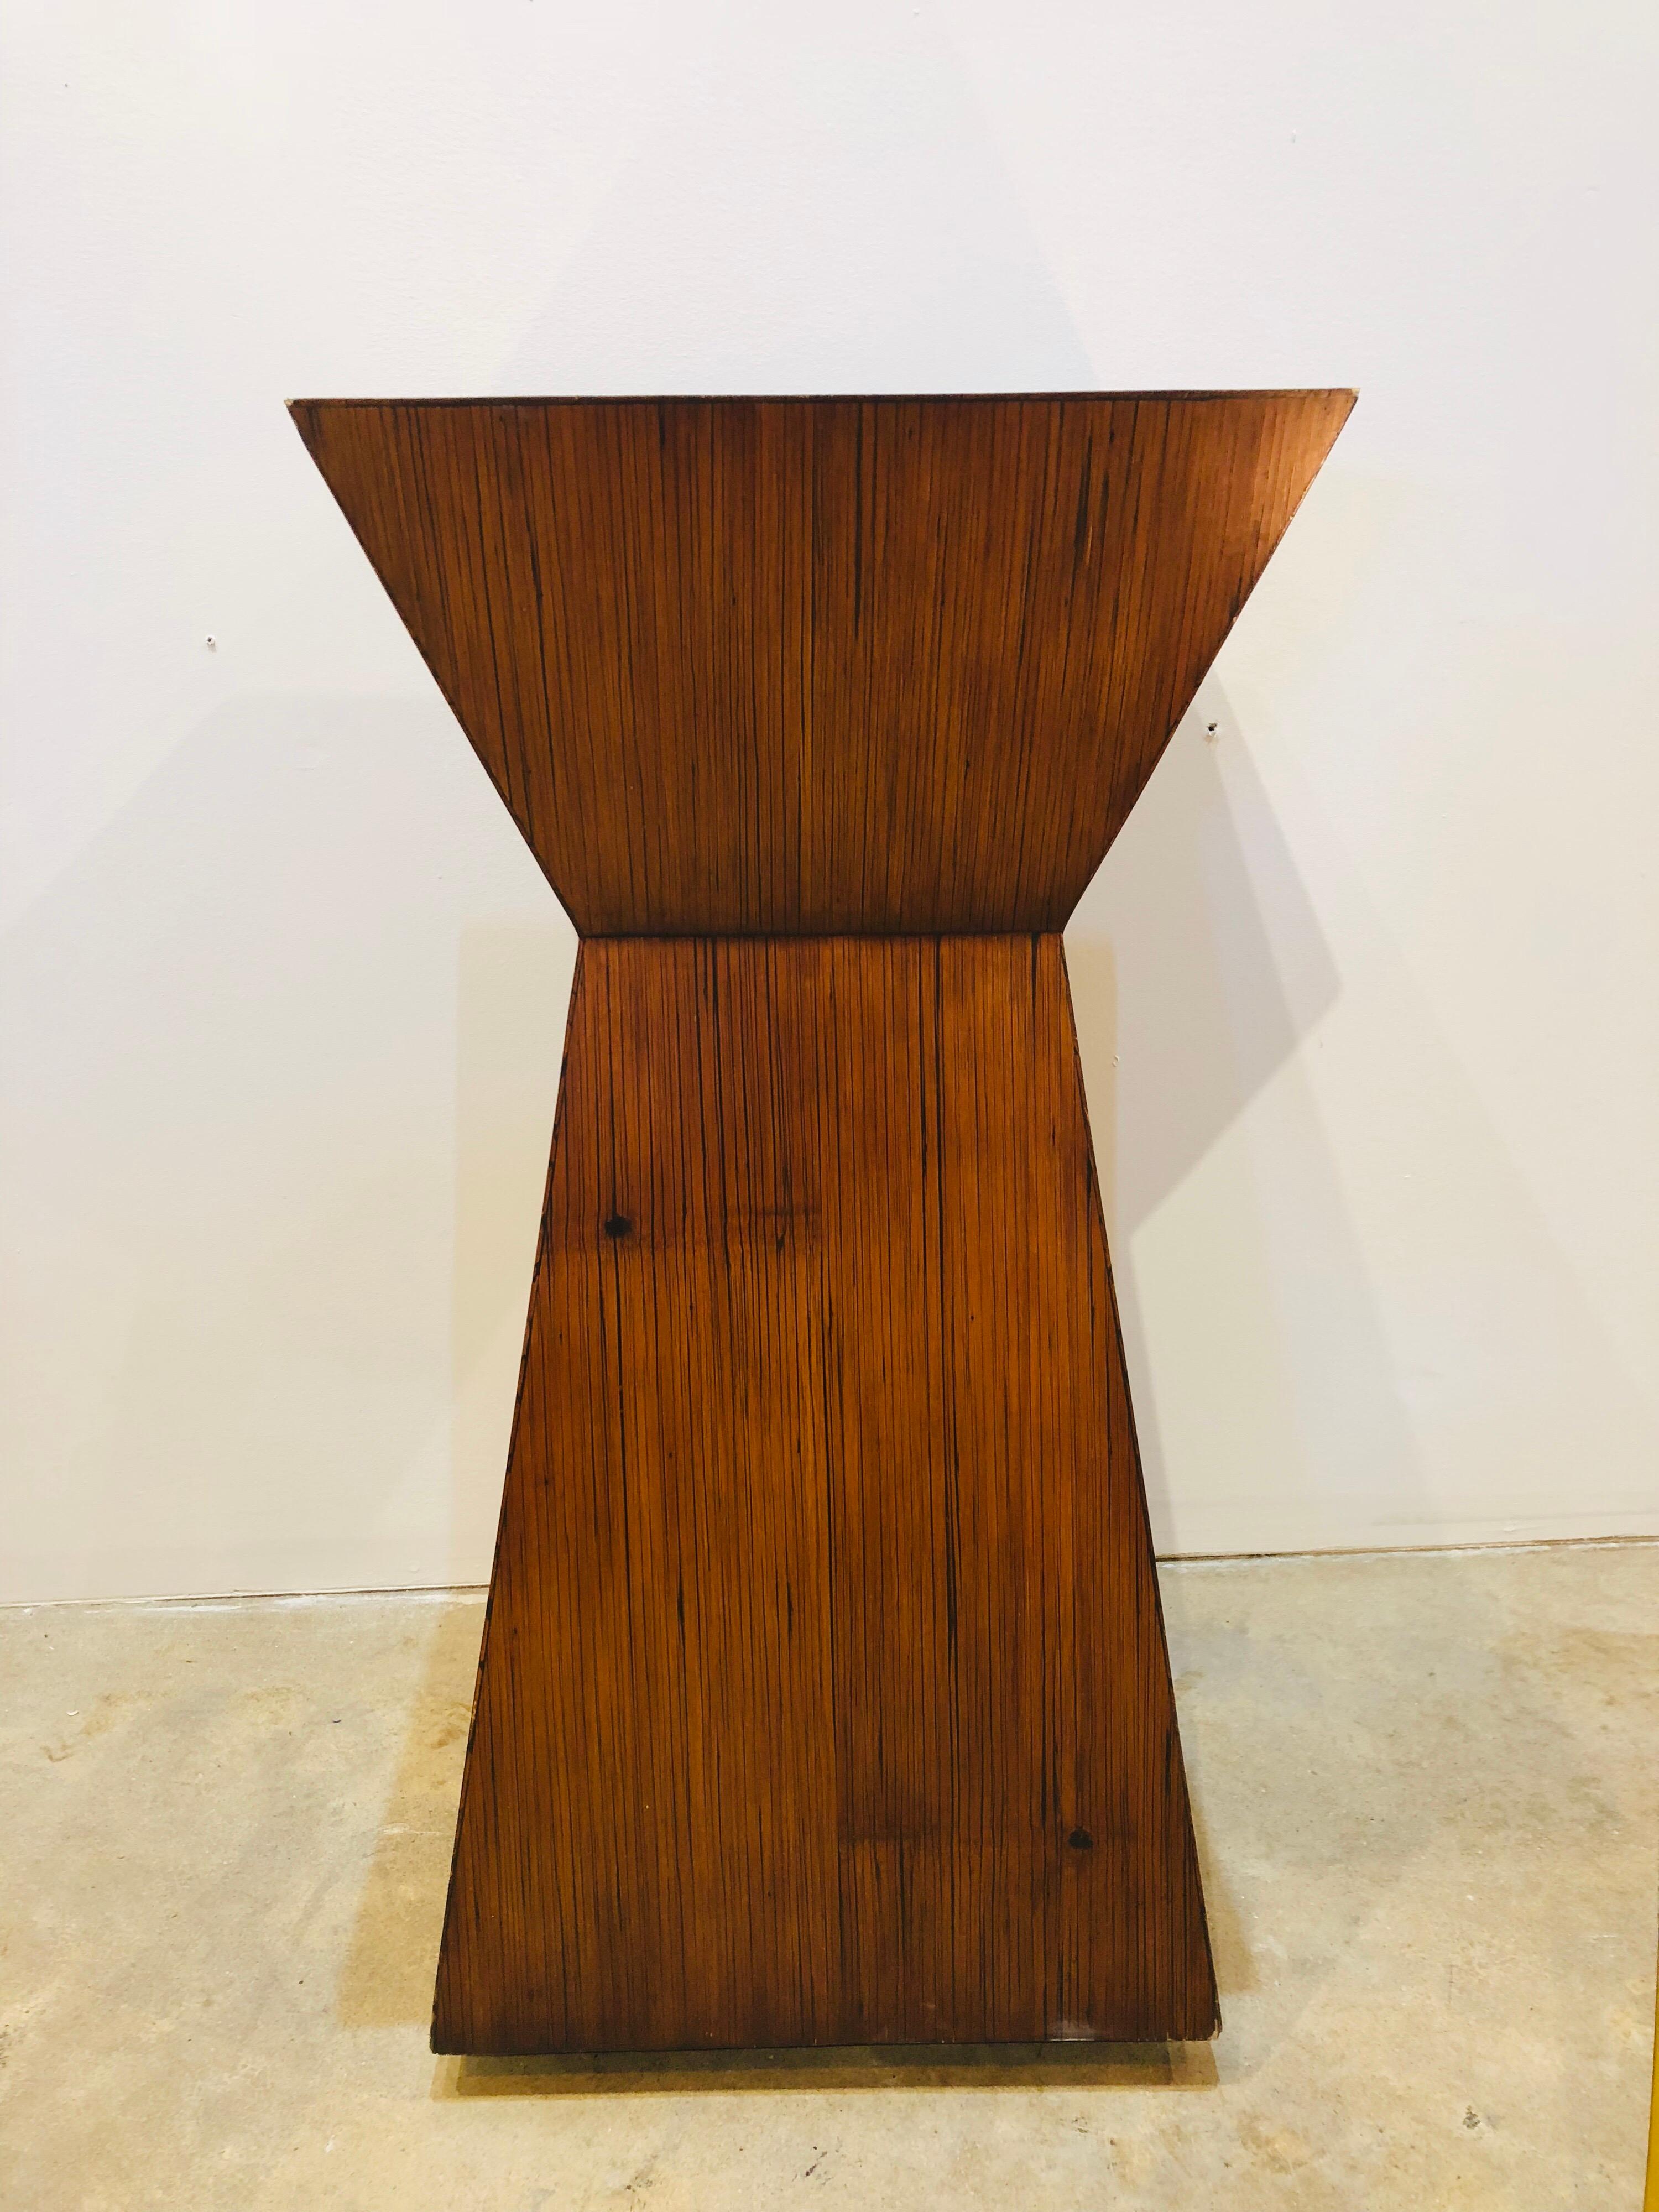 Midcentury wood accent table/ pedestal. Measures: Top 16